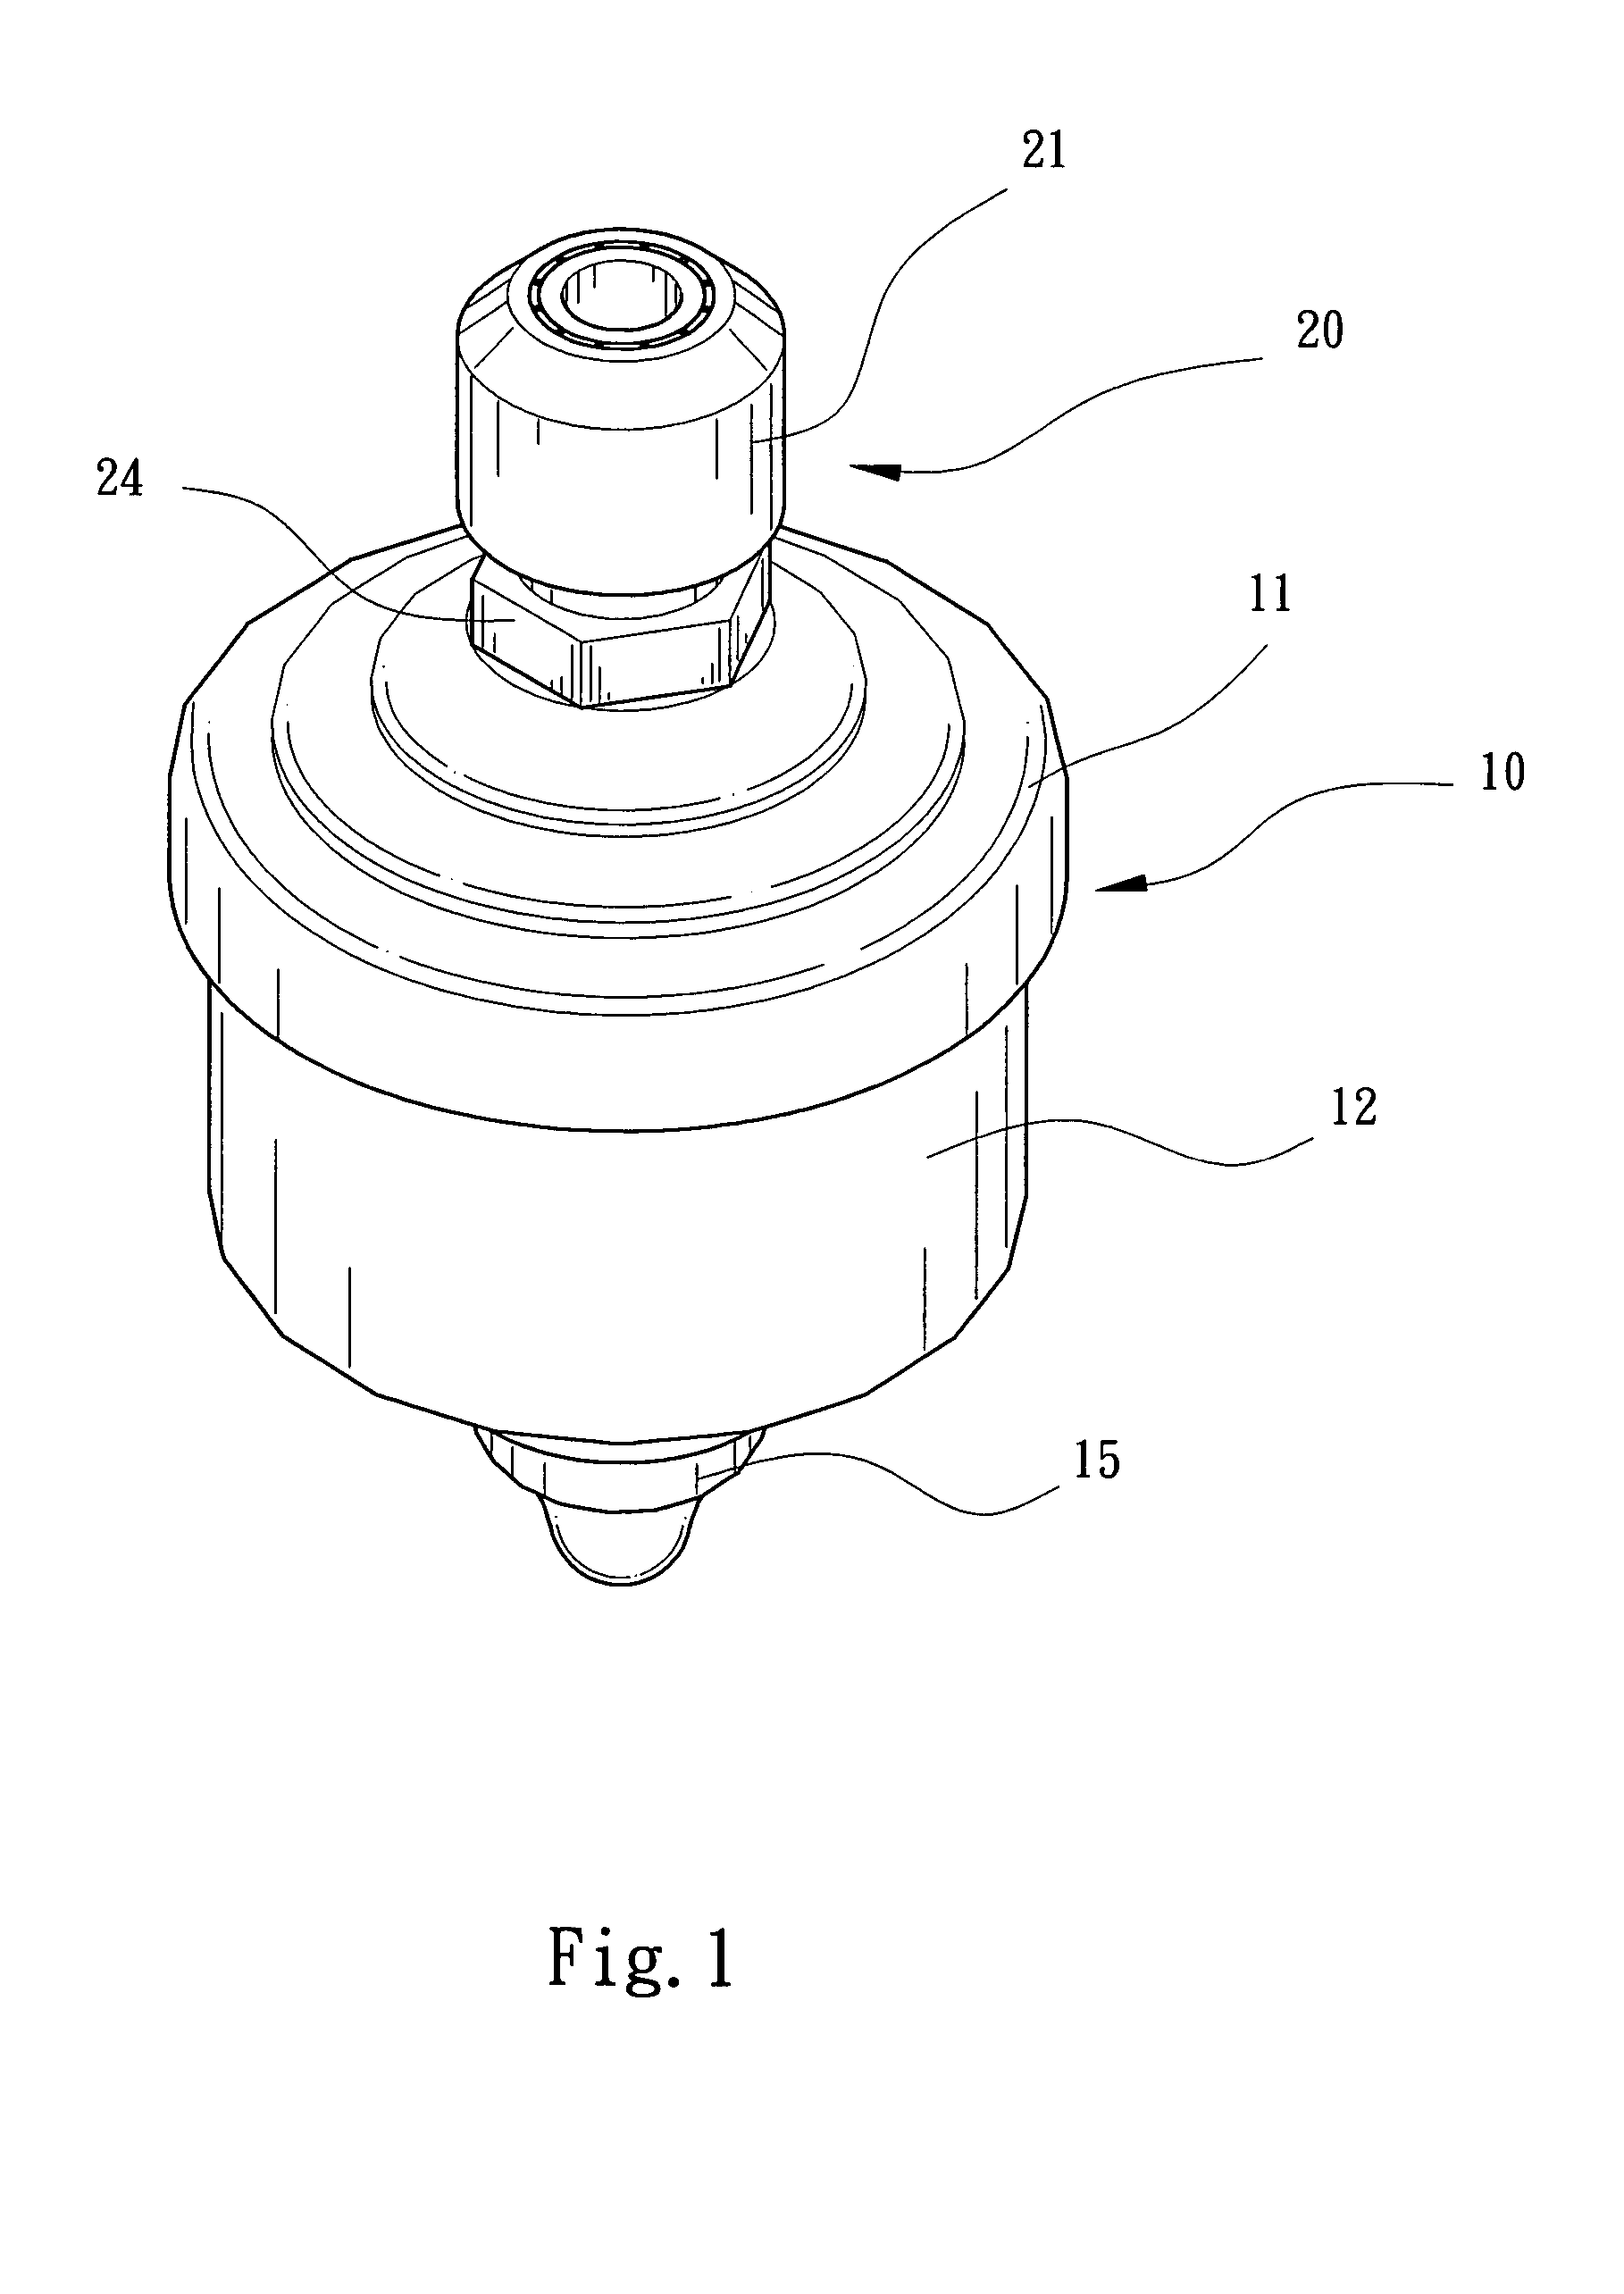 Simple faucet water-filtering device